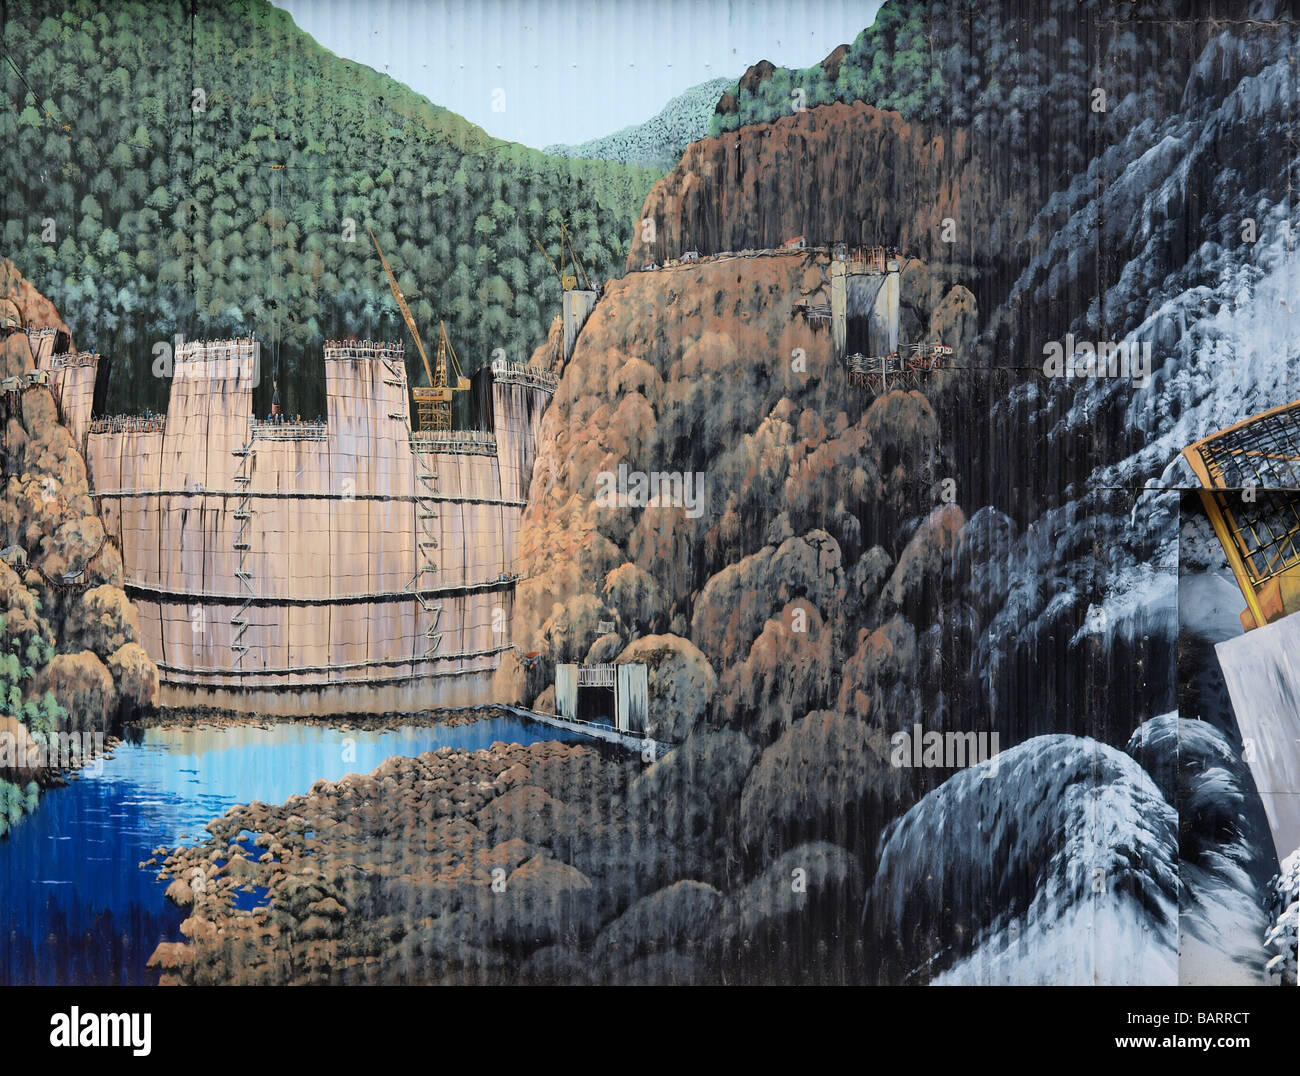 PAINTED MURAL DEPICTING THE BUILDING OF HYDRO ELECTRIC POWER STATION SCHEME IN TASMANIA AUSTRALIA Stock Photo